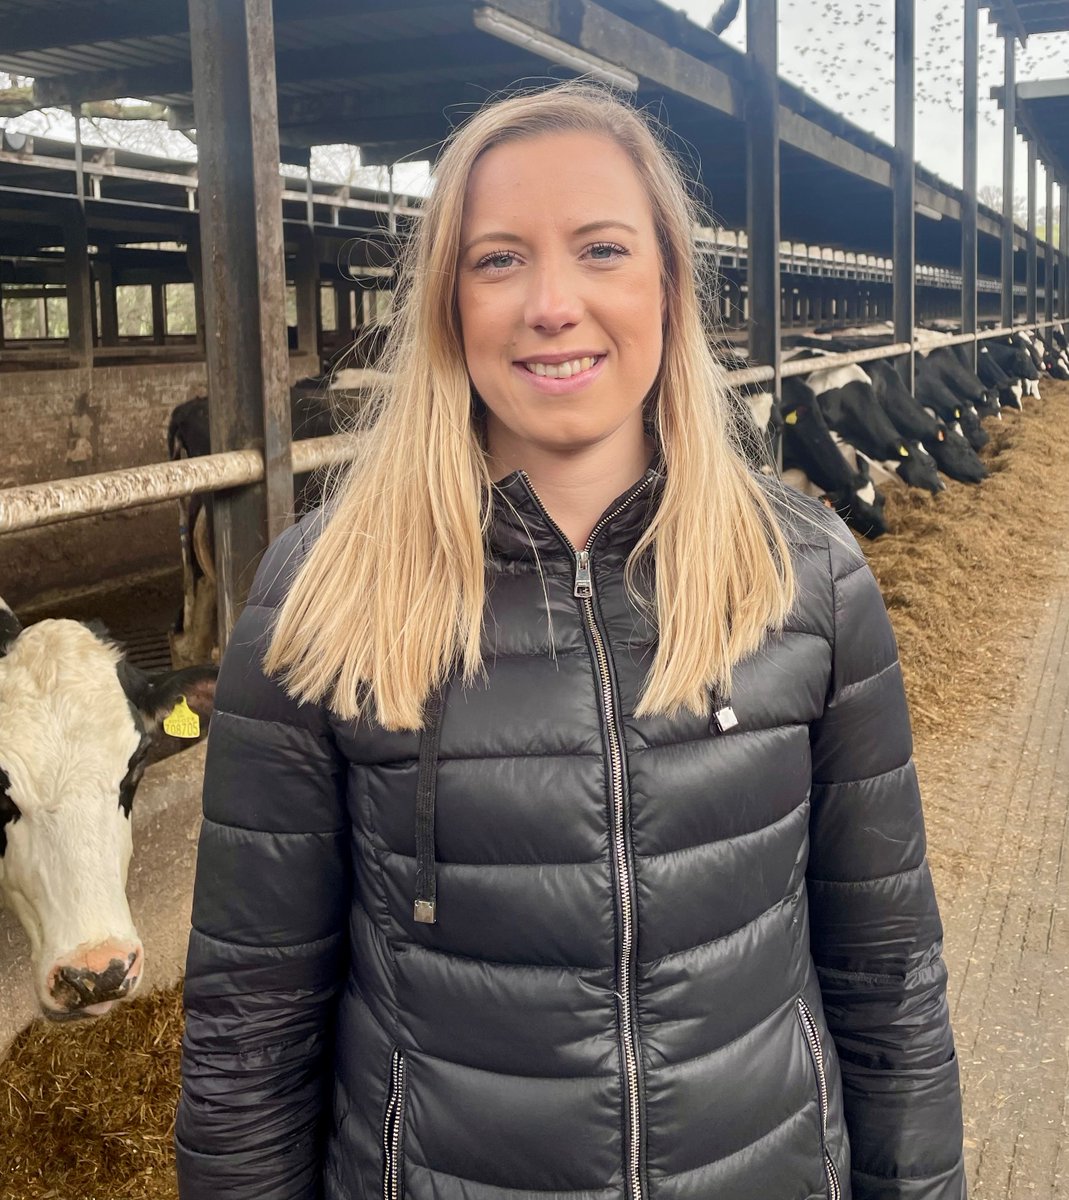 Are you coming to our next #FarmOfTheFuture event? Annie Williams, business development manager and ruminant nutrition specialist at @UKAgriTech, will be sharing insights into how feed additives can influence emissions from livestock. Join us at @PlumptonCollege on 30th May to…